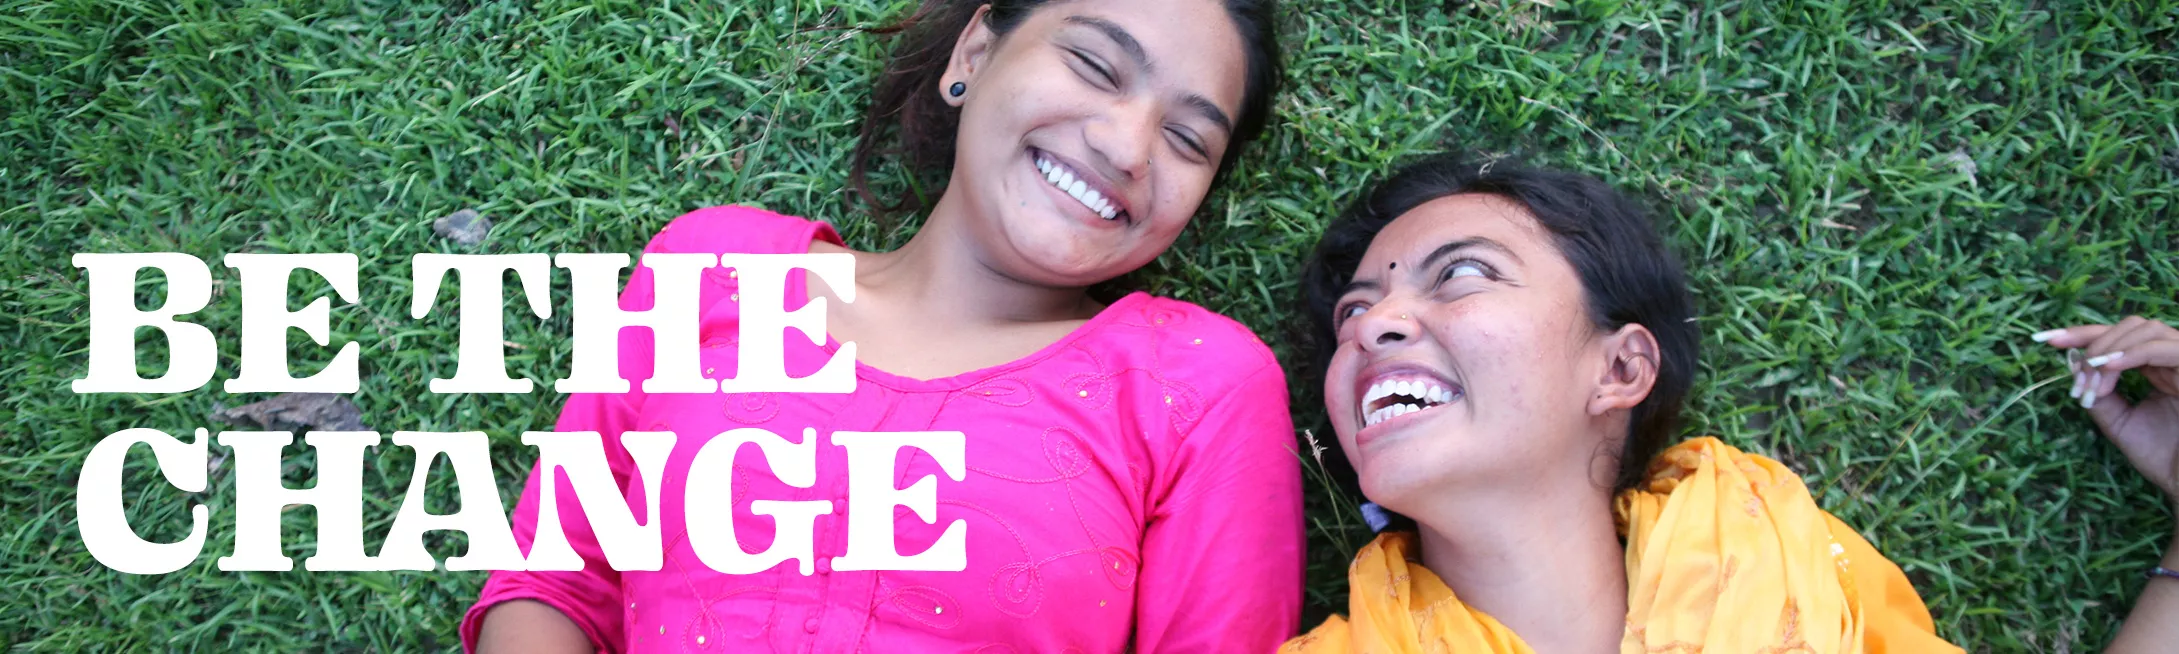 2 girls smiling at each other with text "Be The Change"